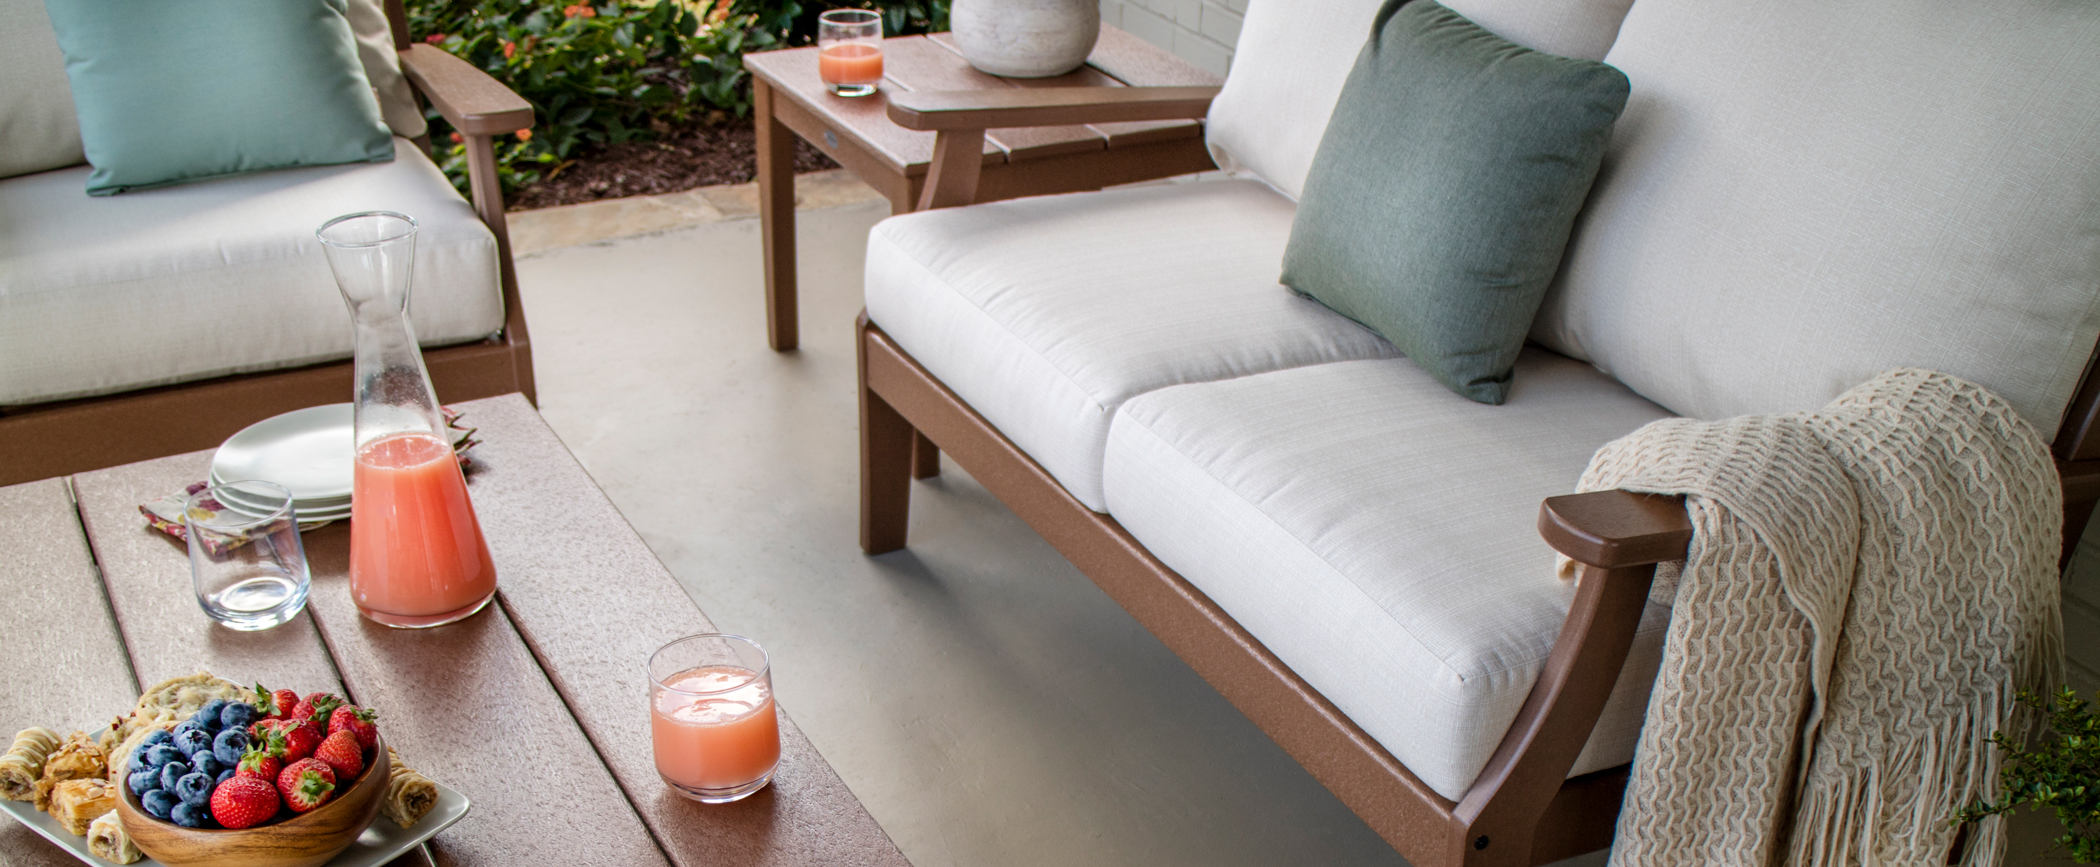 How To Clean Outdoor Cushions Polywood - How To Keep Outdoor Furniture Cushions From Sliding